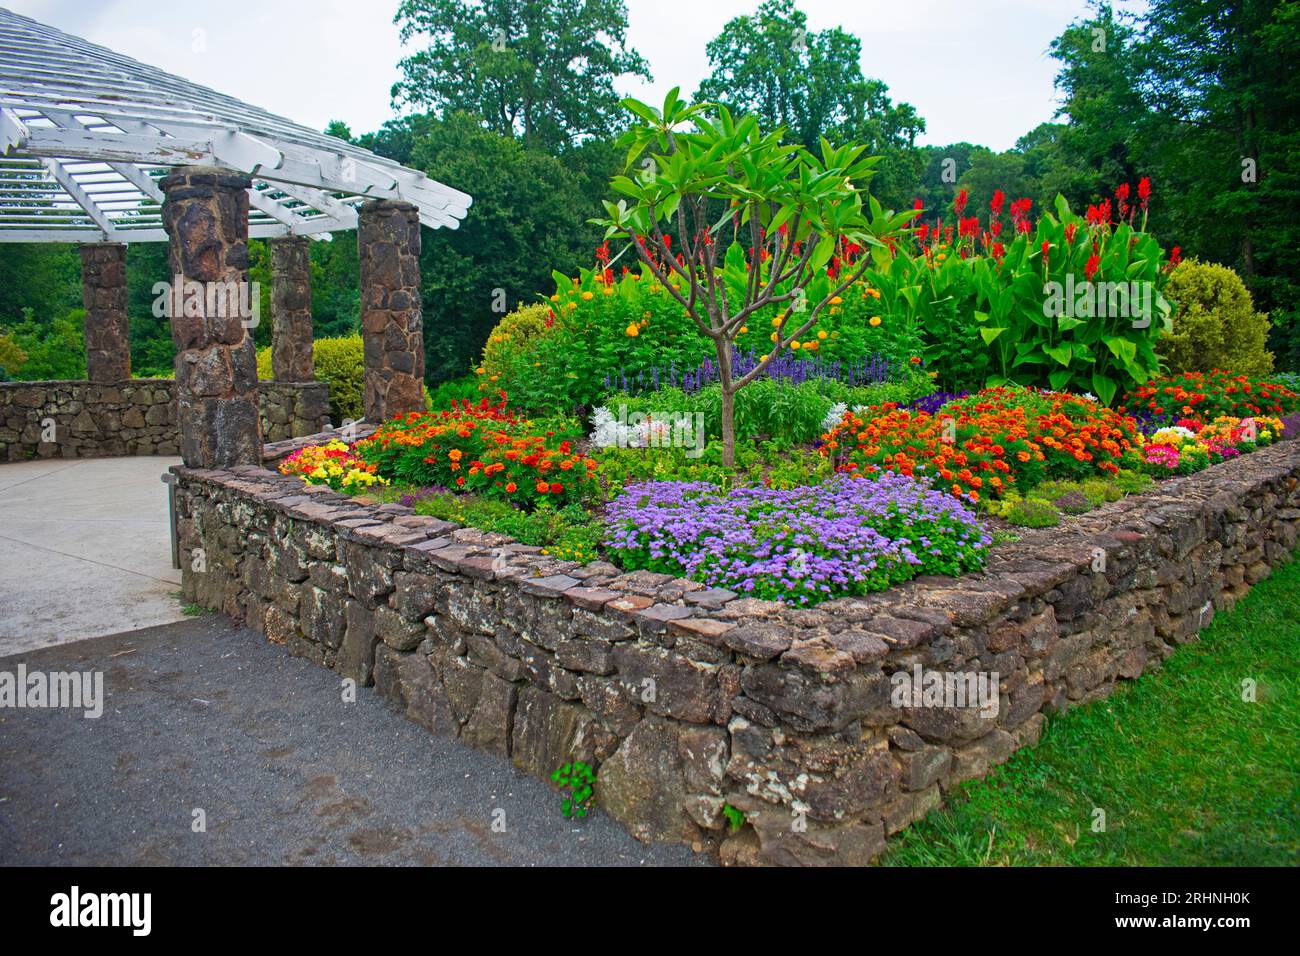 A variety of colorful flowers in a stone flower bed at the end of the rose garden -03 Stock Photo